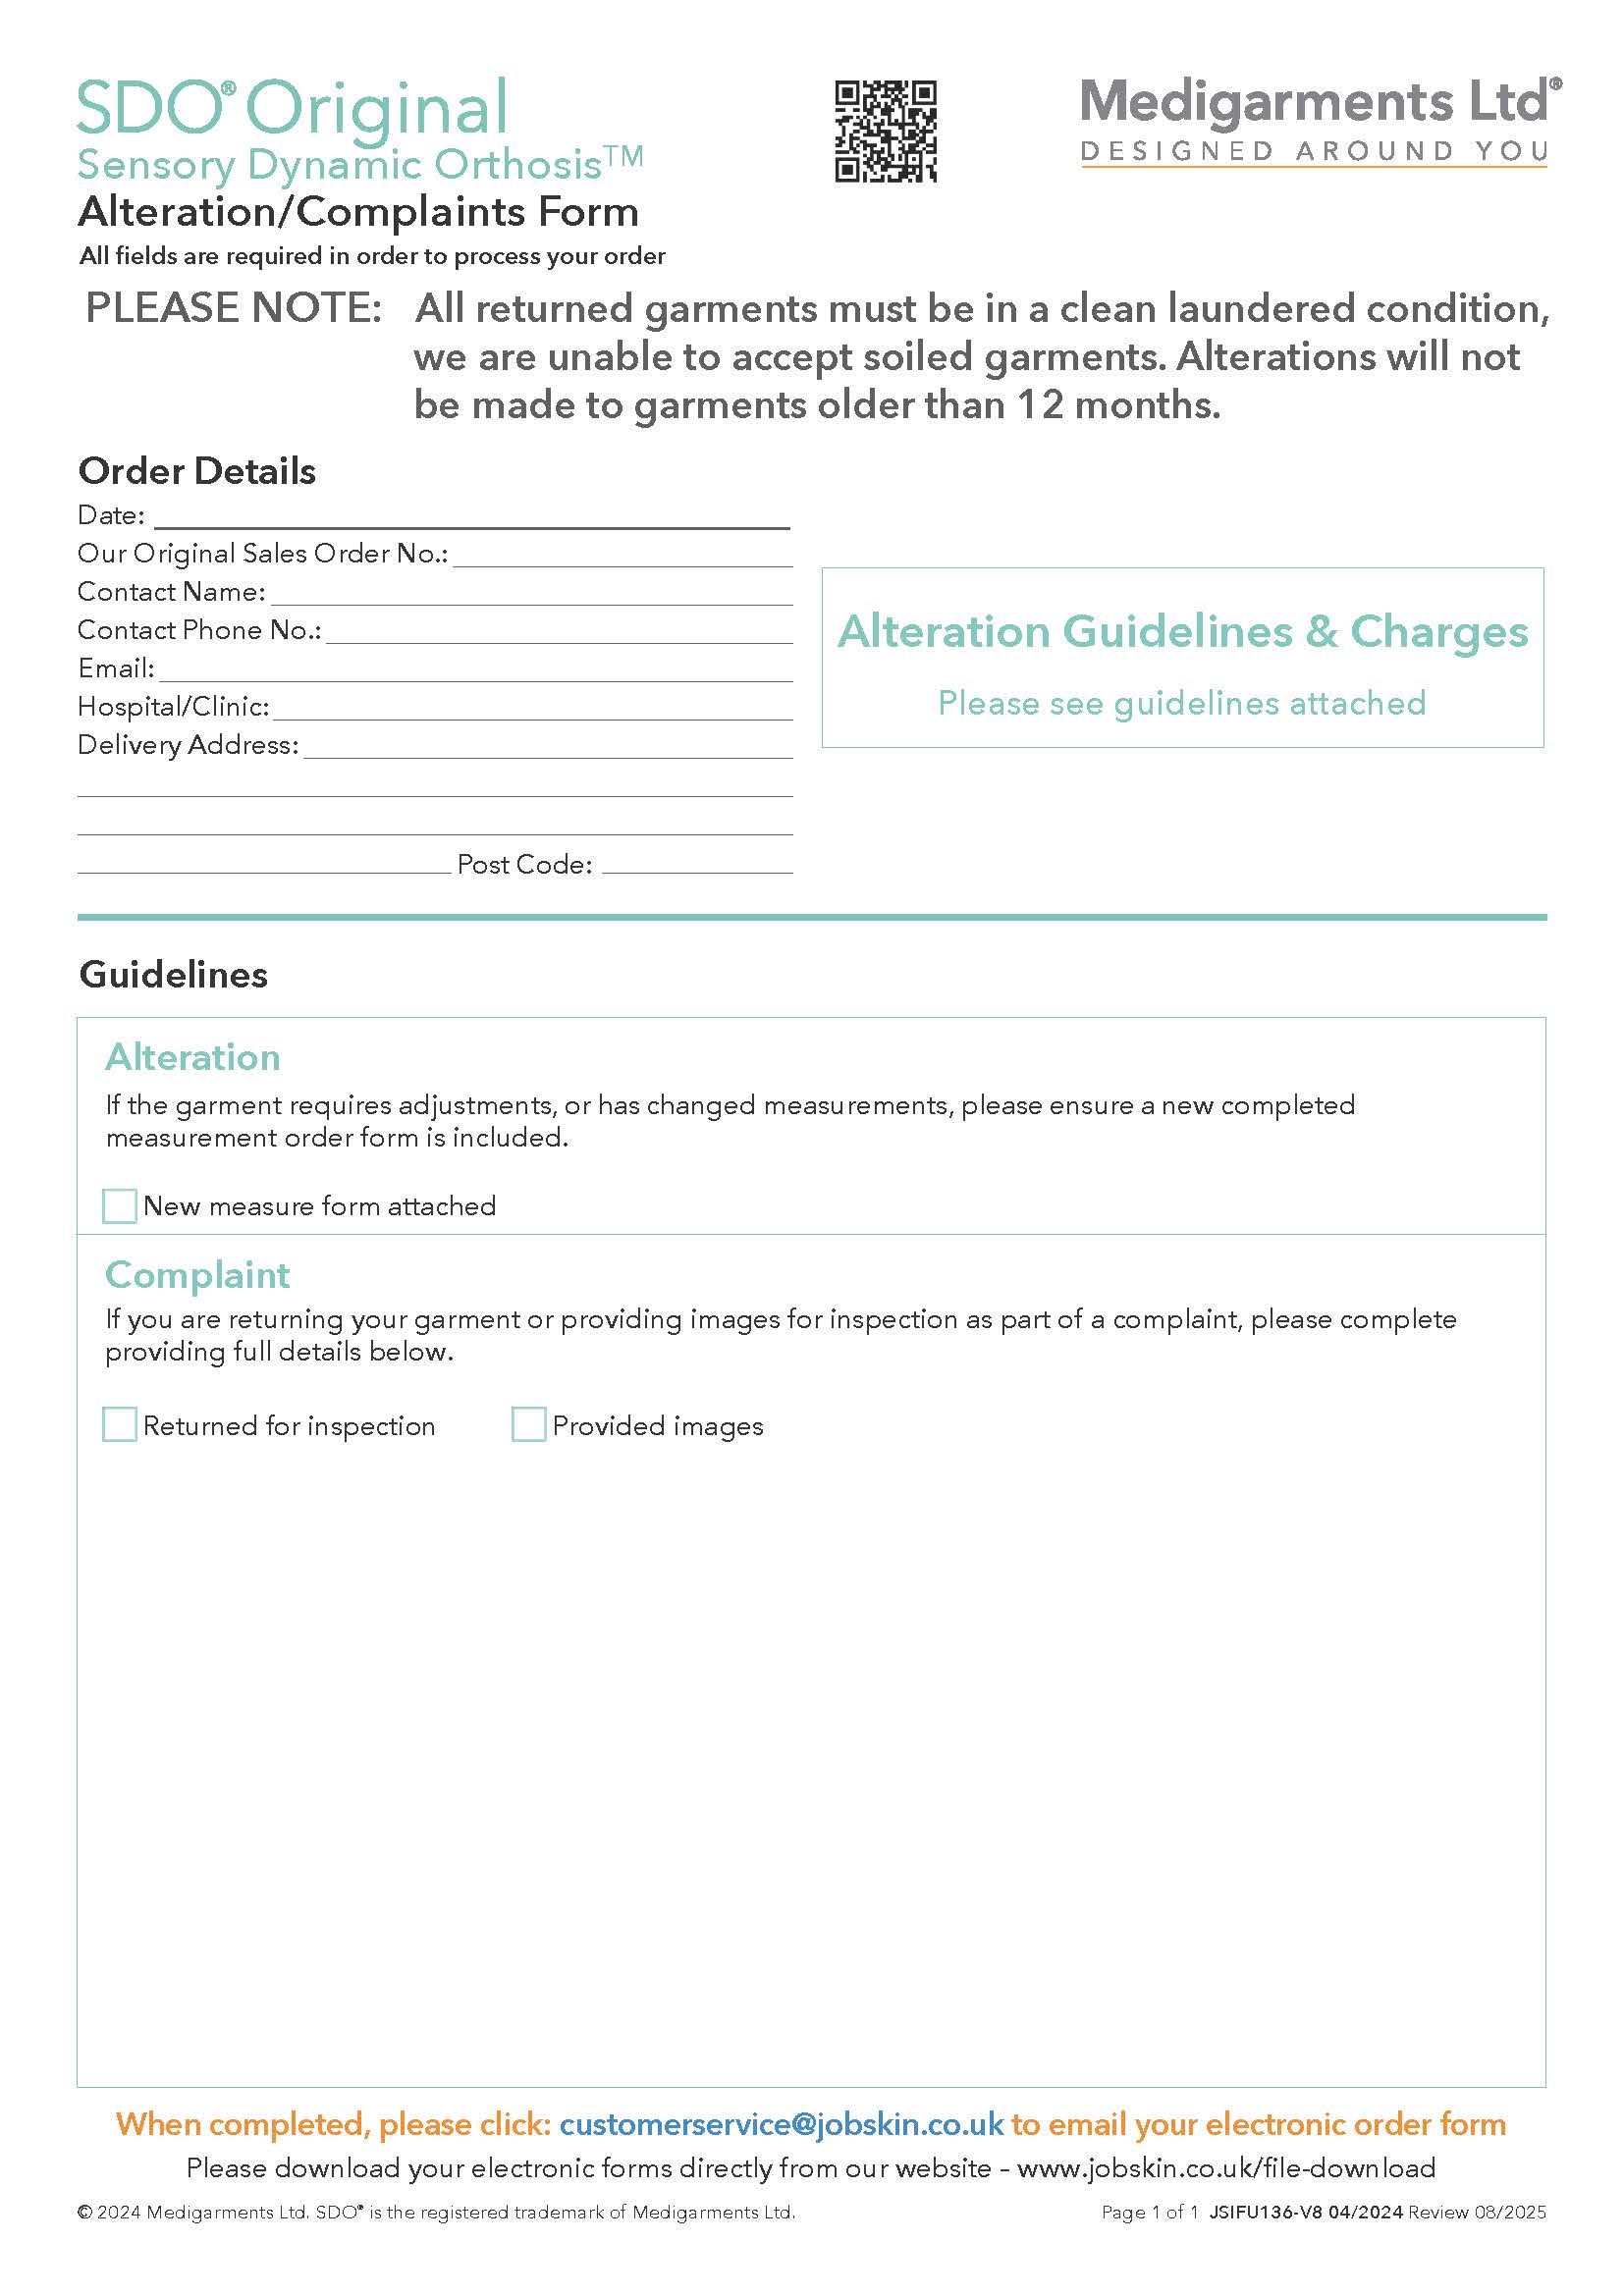 SDO Reorder and Alteration Form